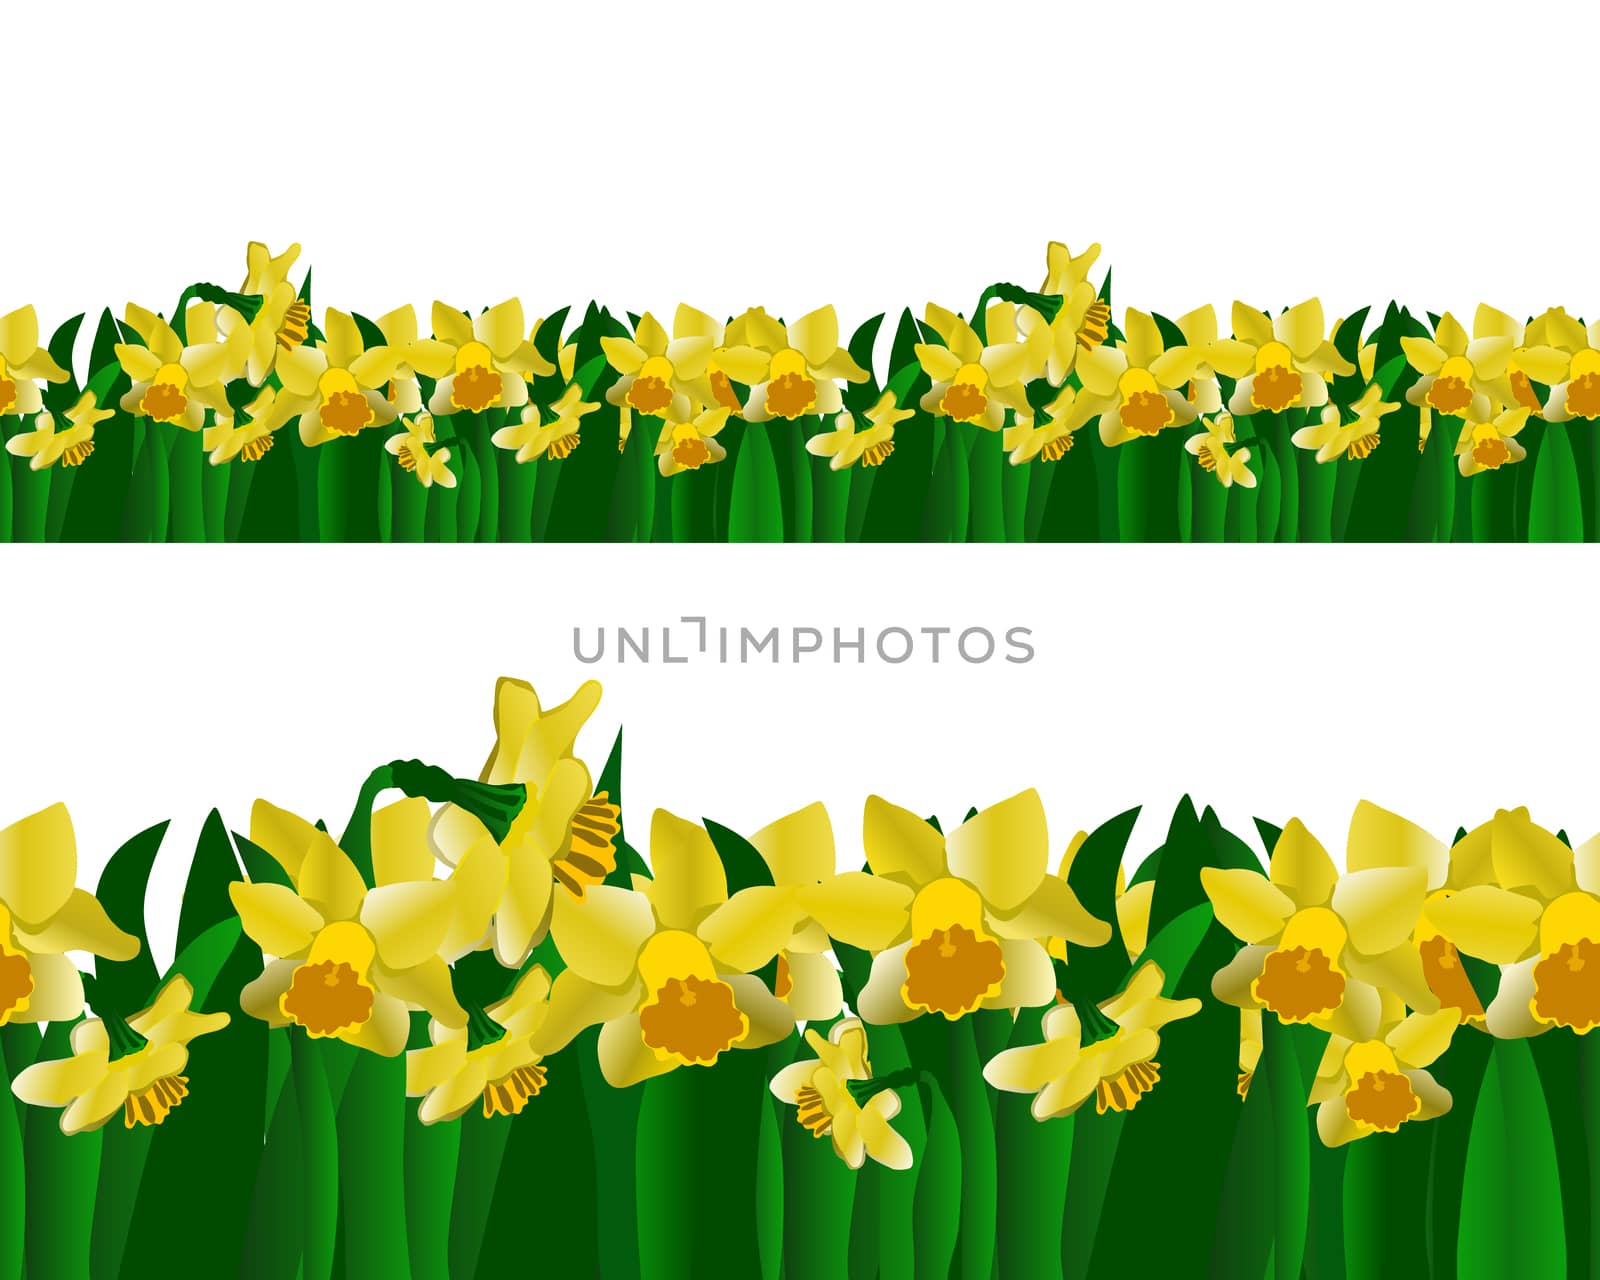 Daffodils seamless horizontal banner. Spring endless border isolated on white background. Vector illustration.